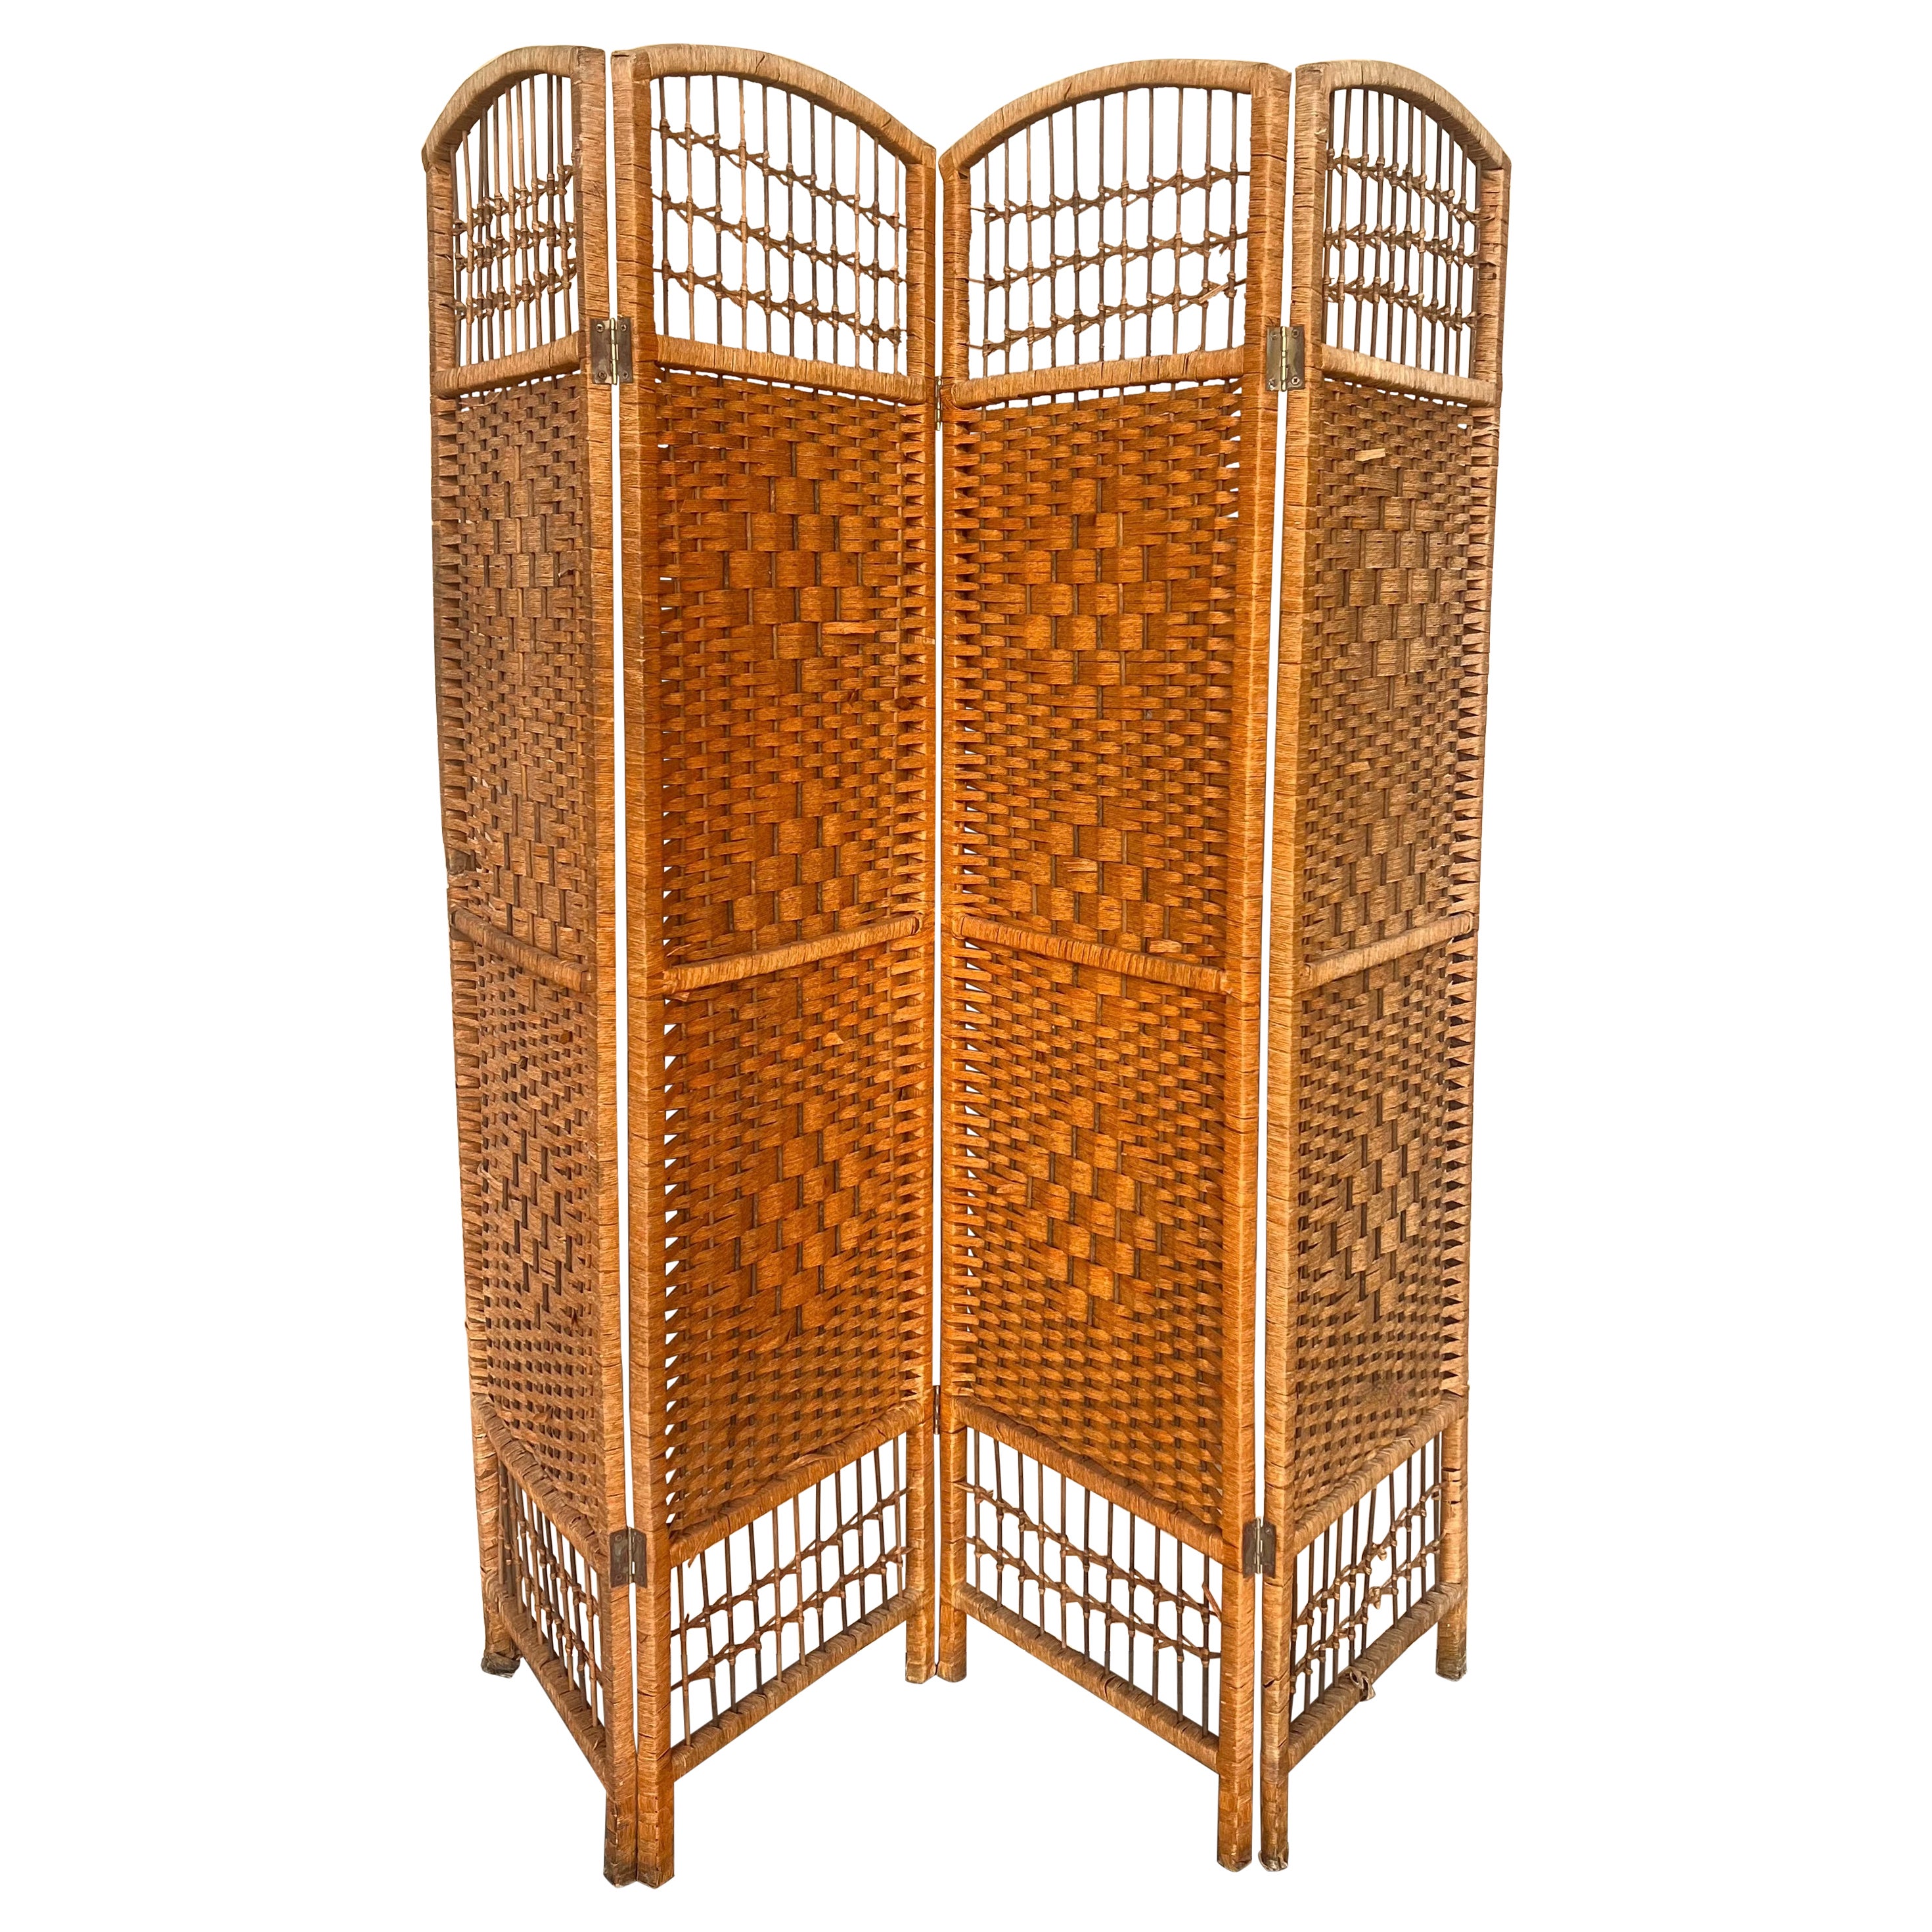 Four-Panel Bamboo Wicker Rattan Folding Screen Room Divider, France 1960s For Sale